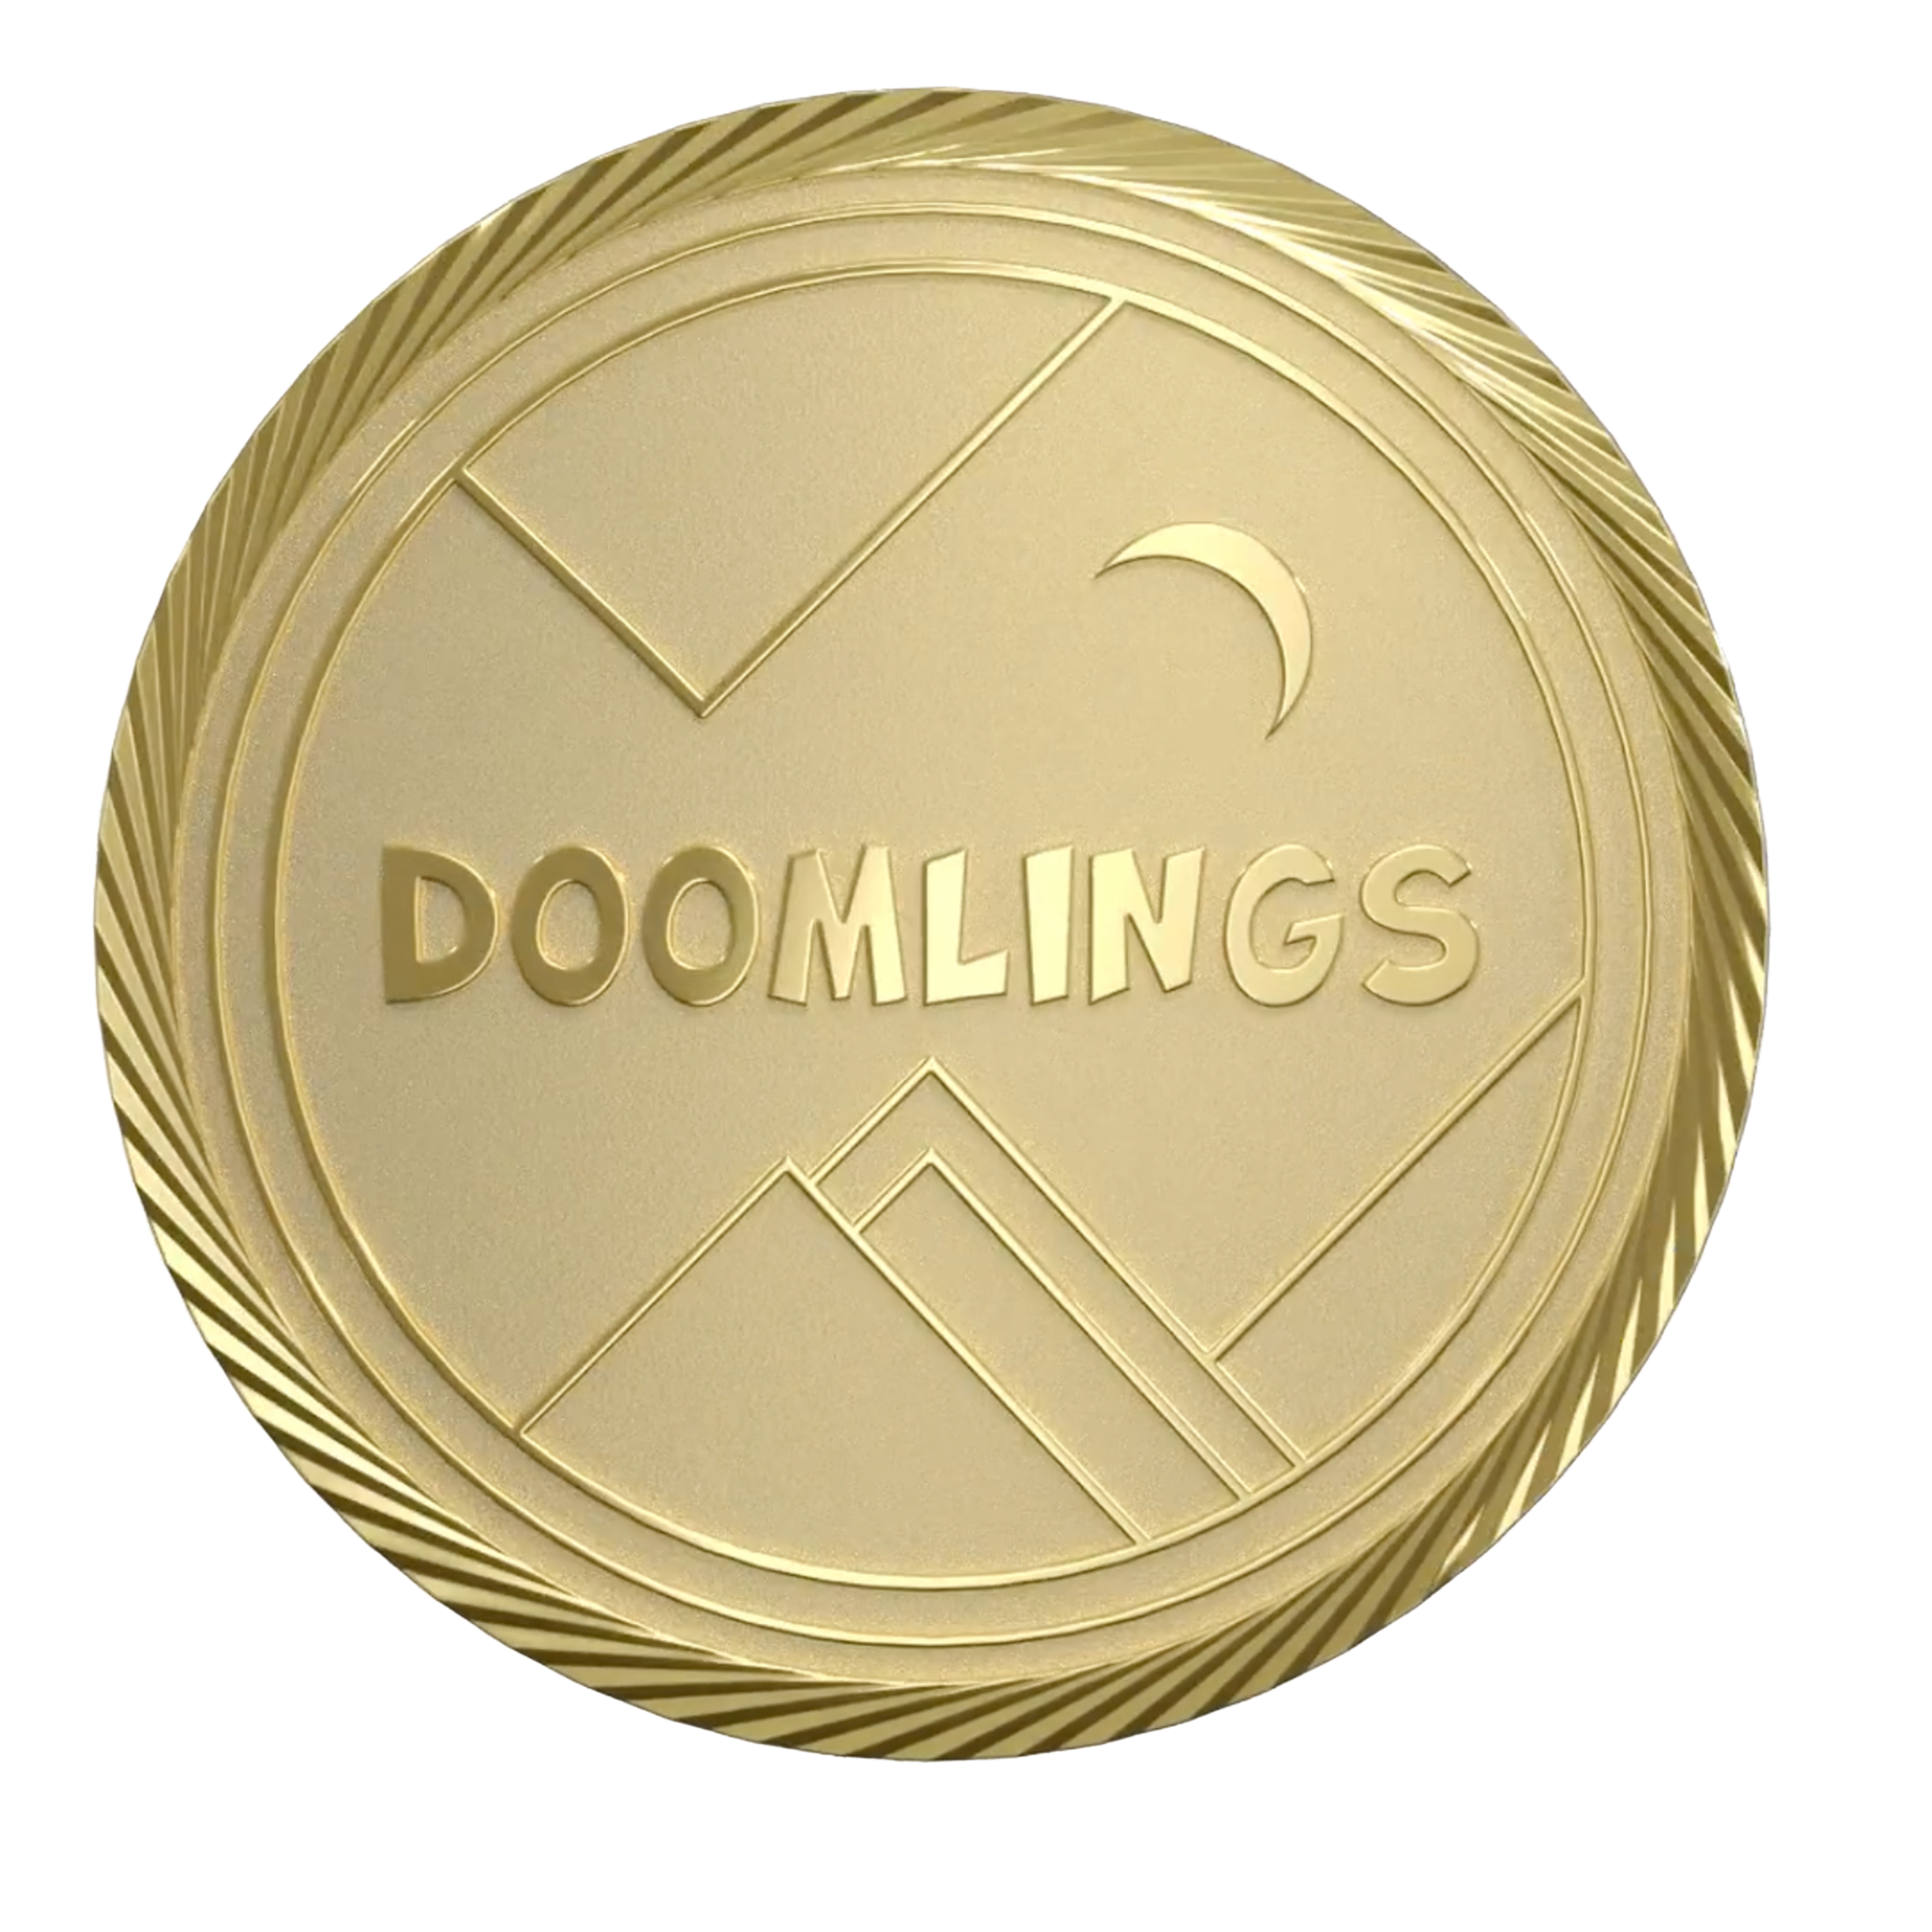 Contagious 1st Player Medallion